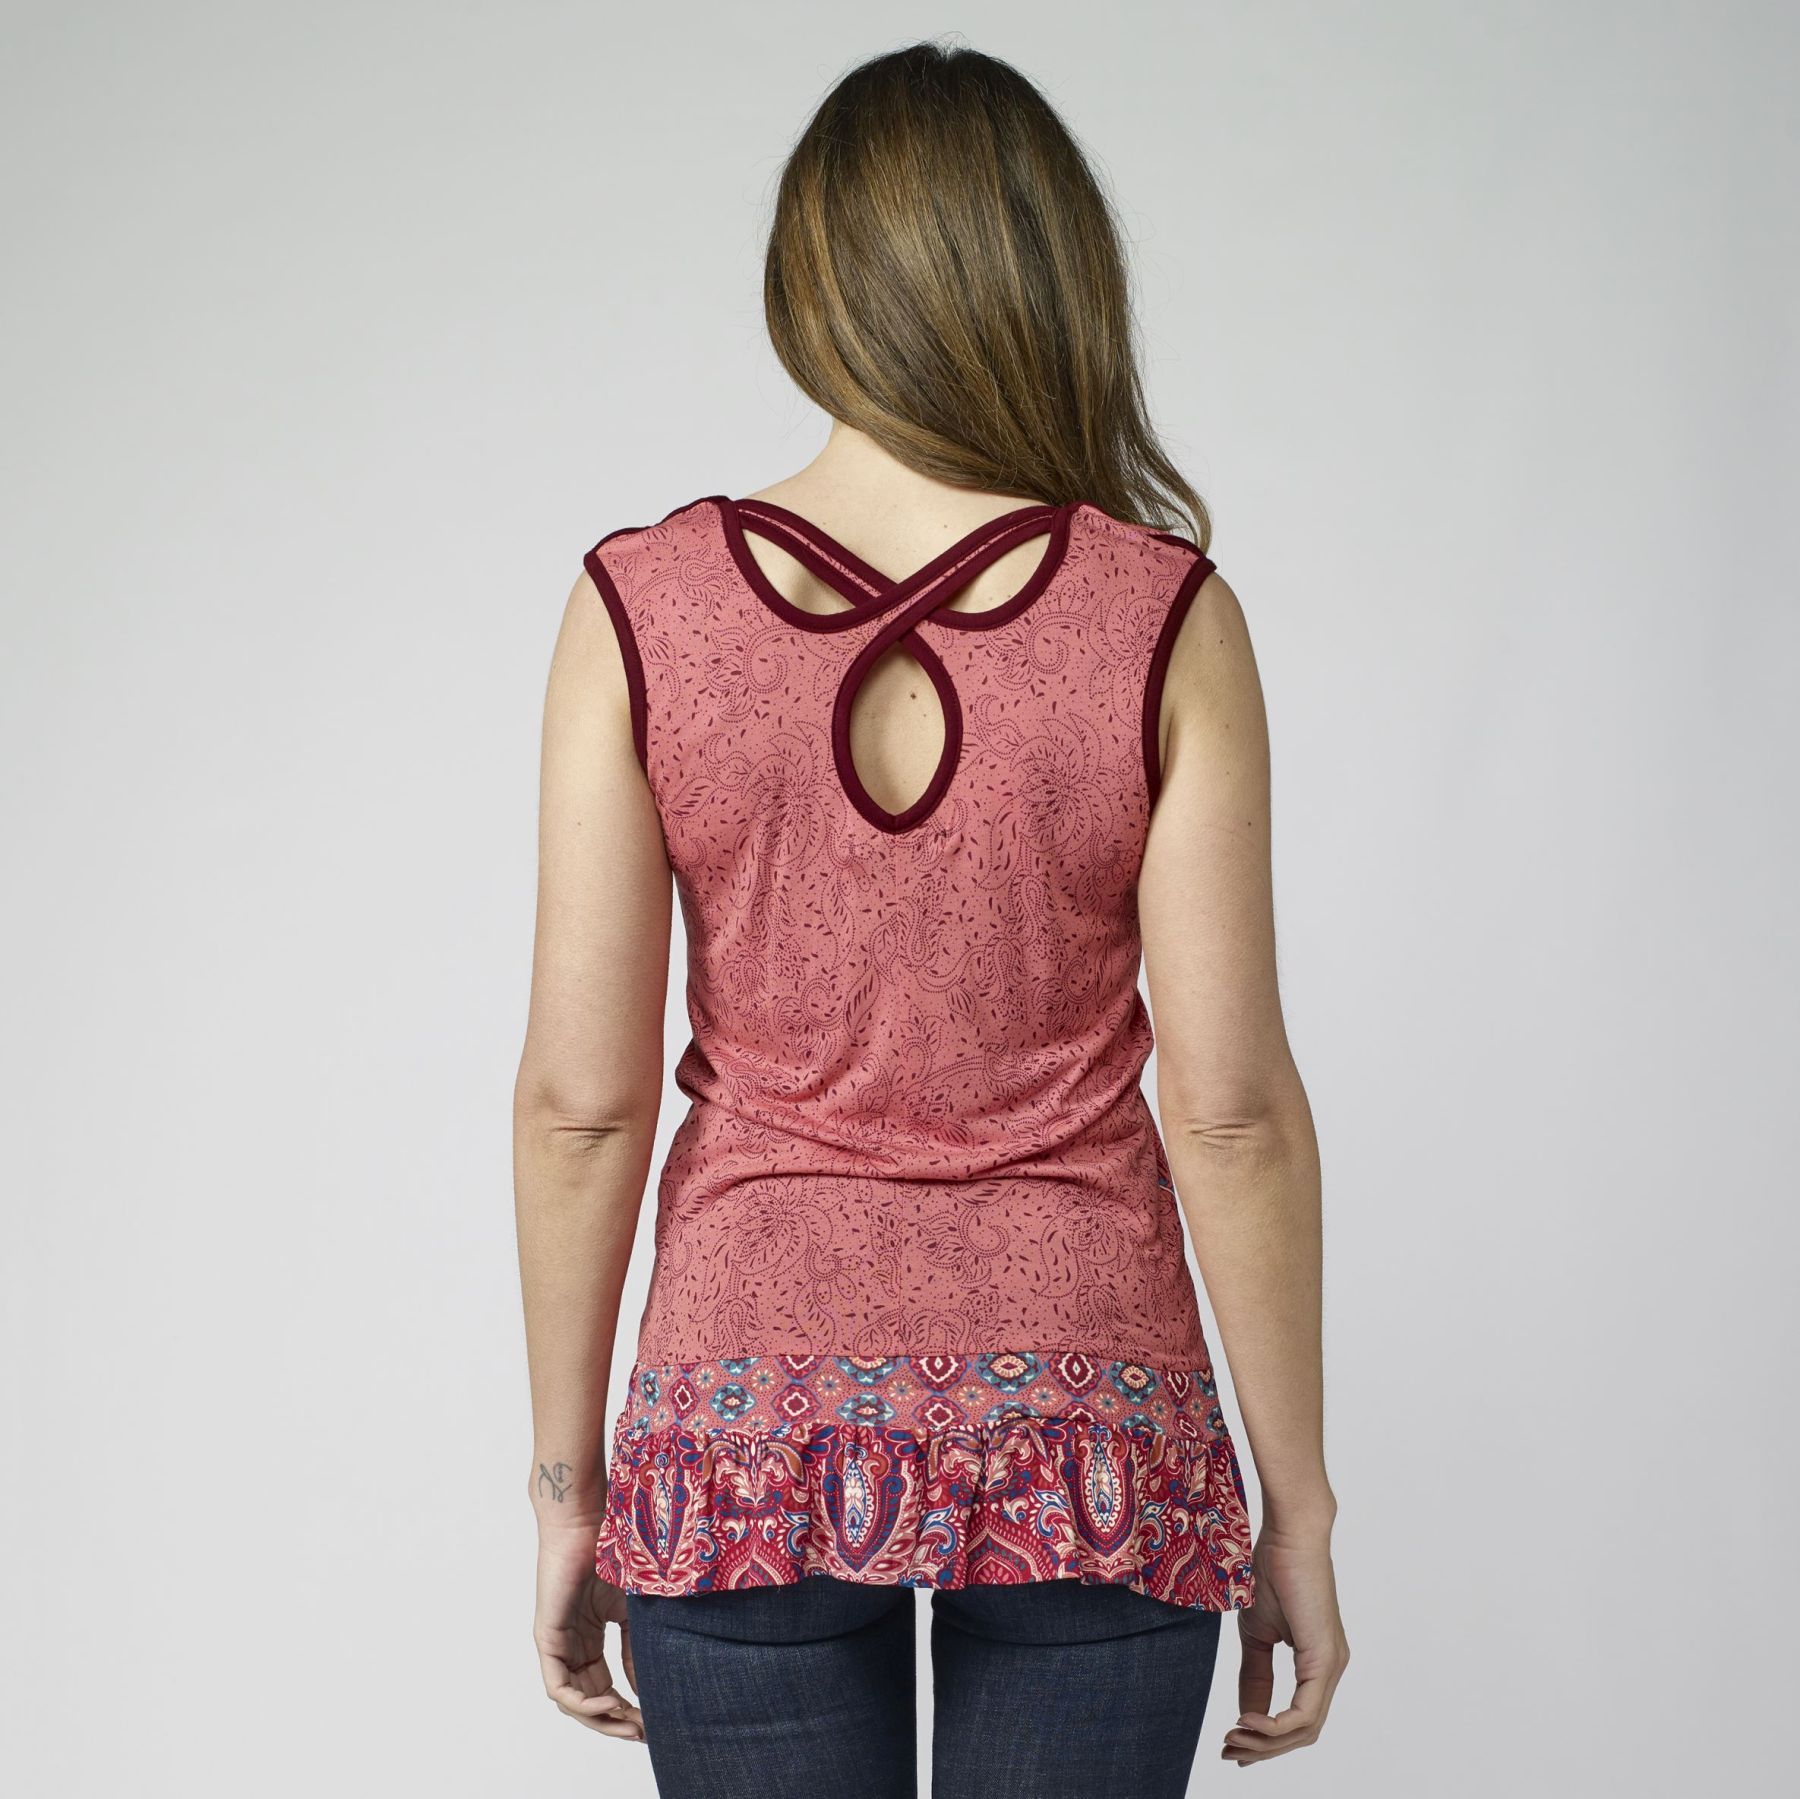 Coral Color Ethnic Print Tank Top for Women 6